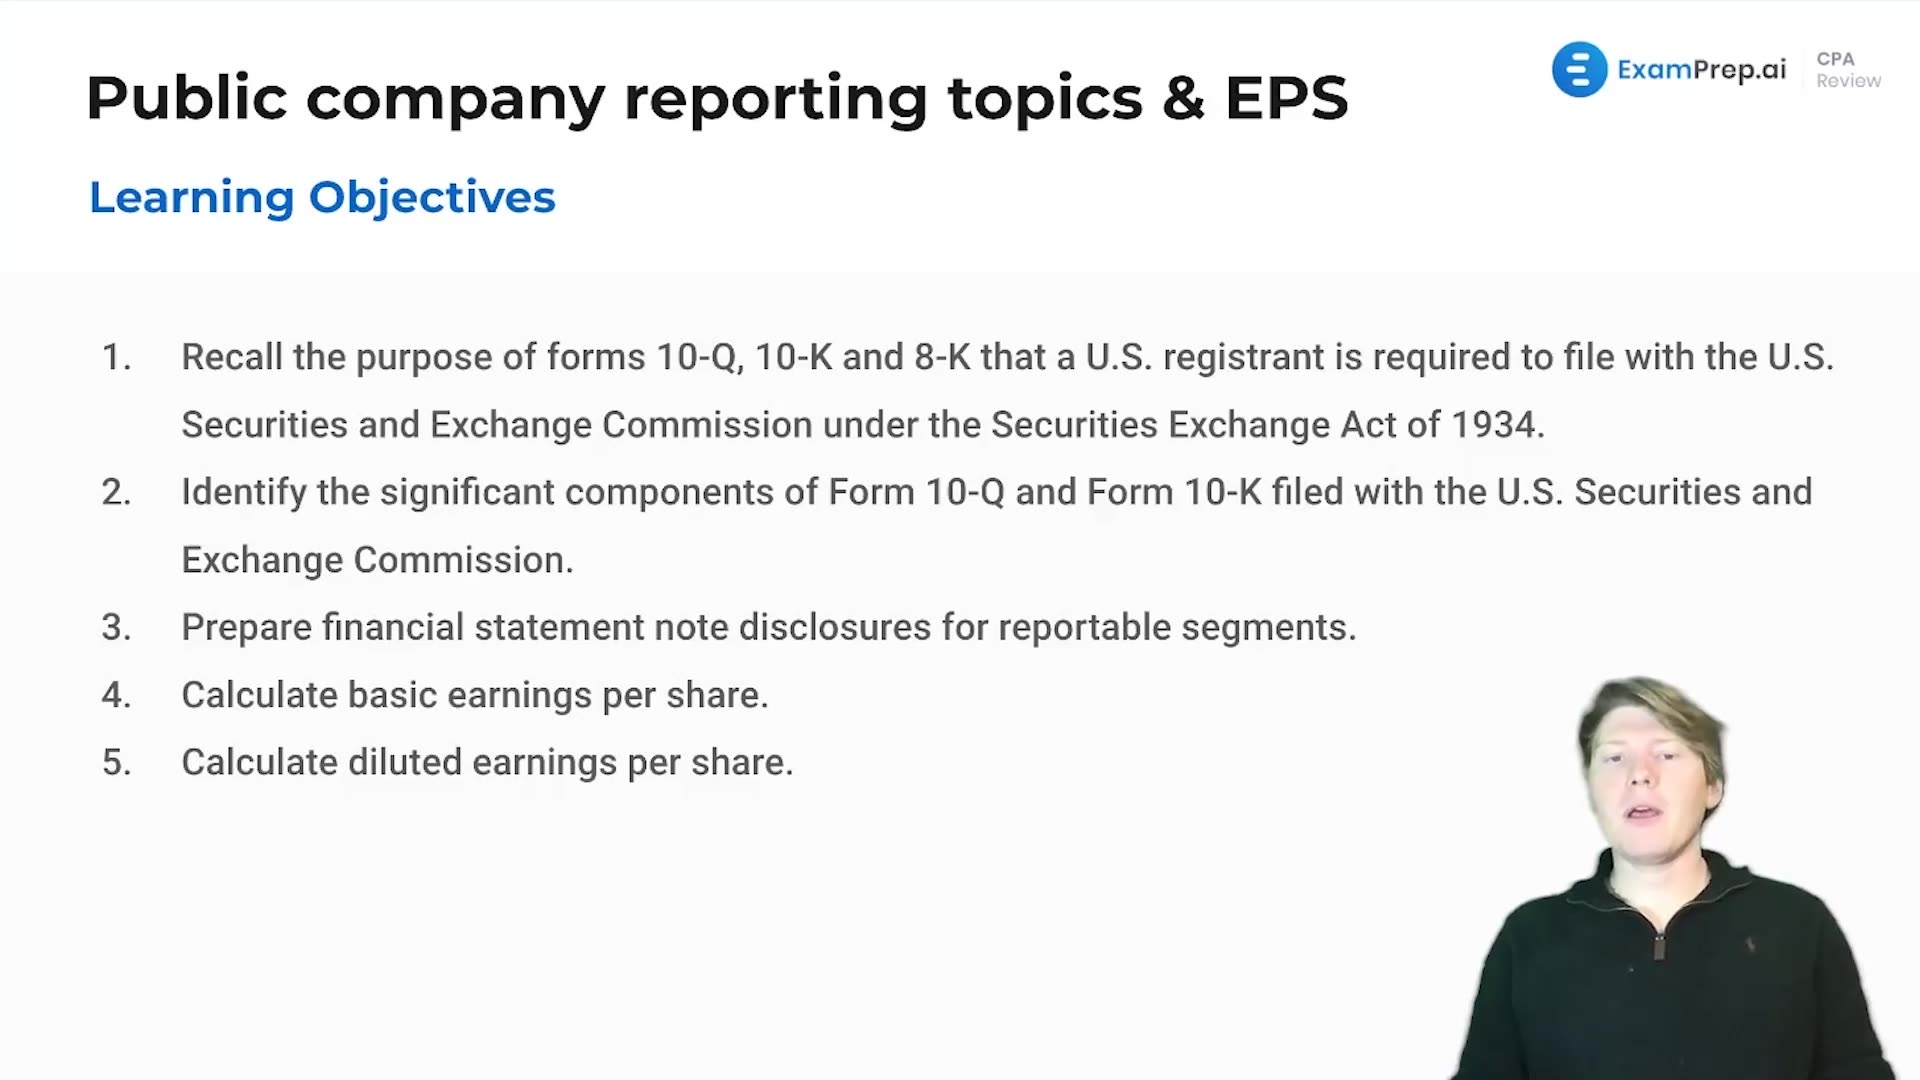 Public Company Reporting Topics & EPS Overview and Objectives lesson thumbnail